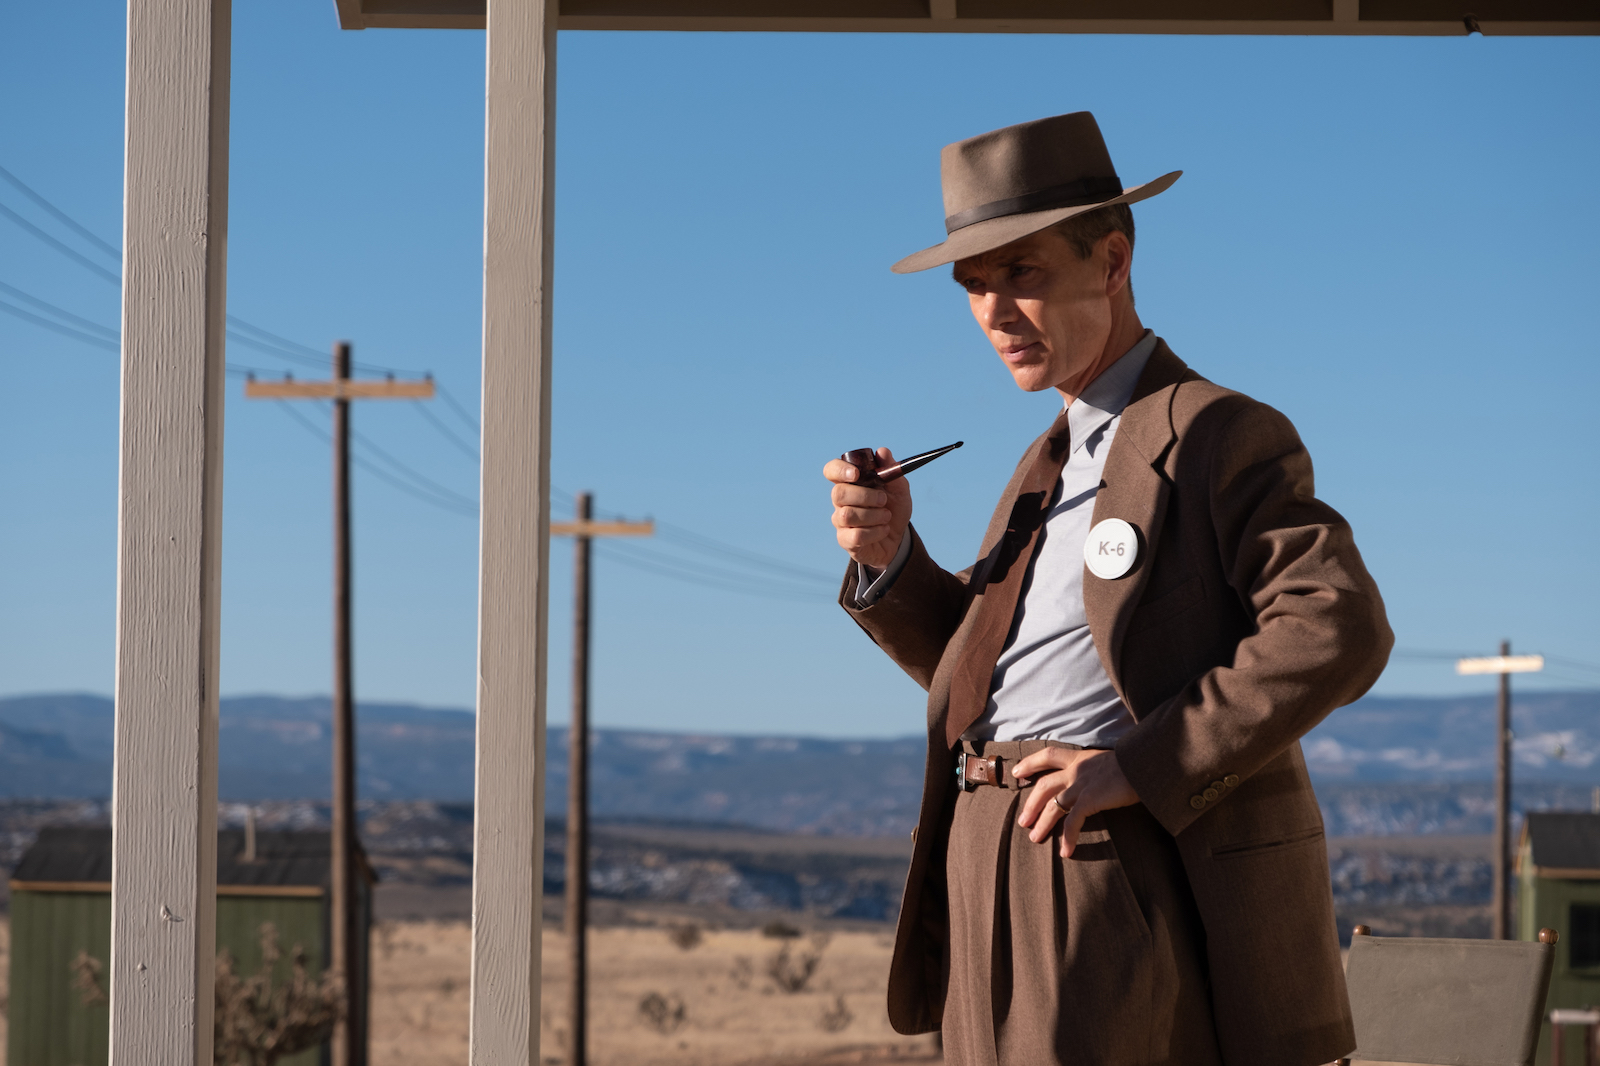 a man in a brown suit and brown fedora smoking a pipe in a desert like landscape.